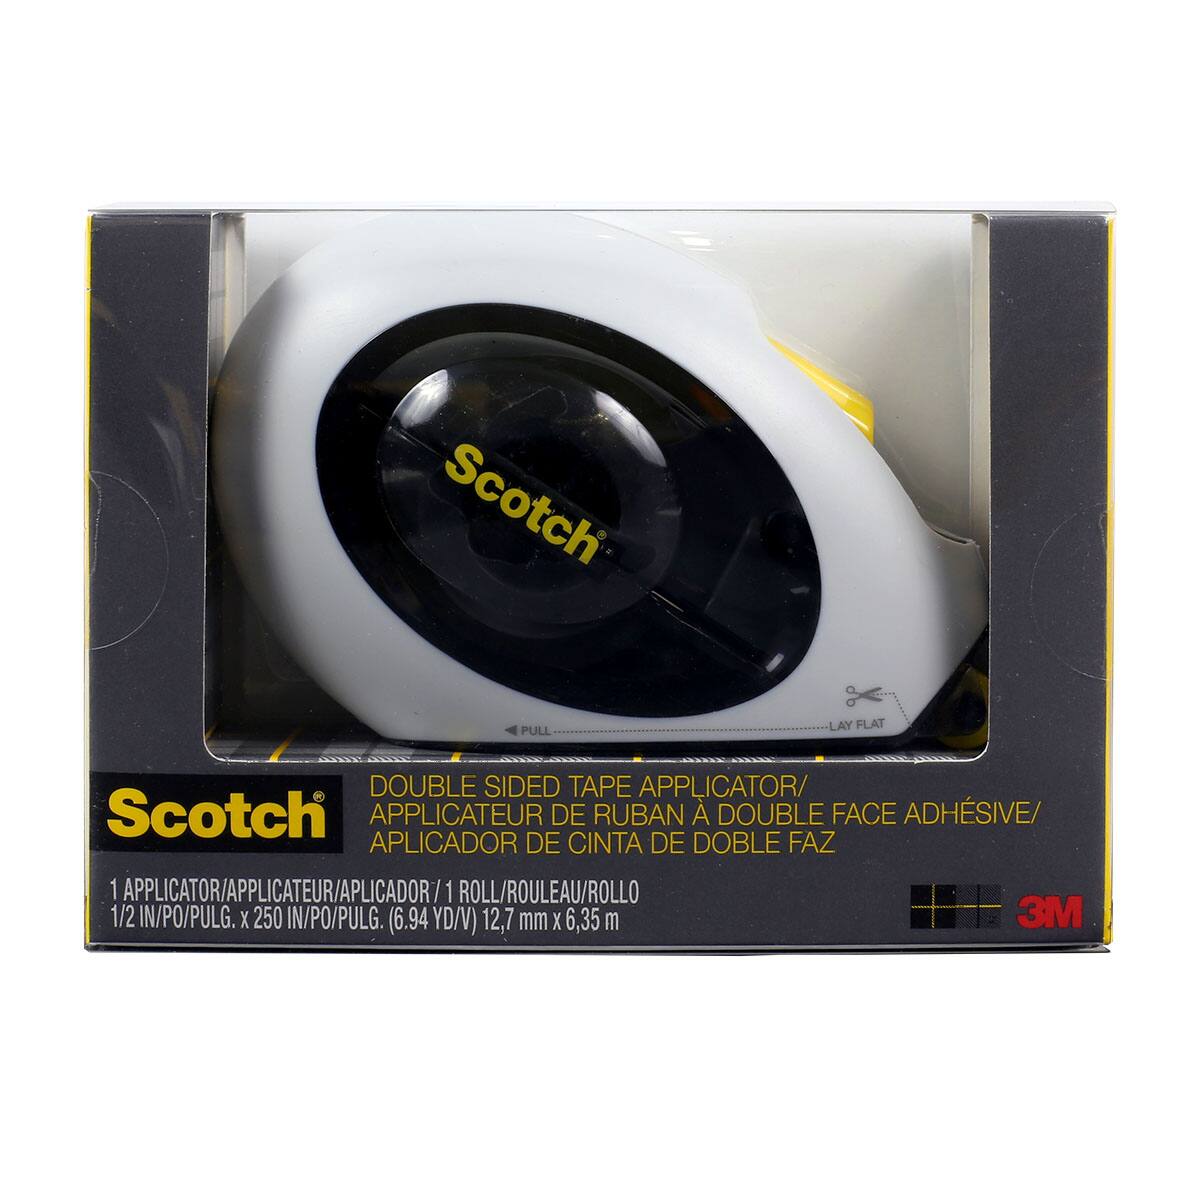 Scotch Double Sided Tape Applicator